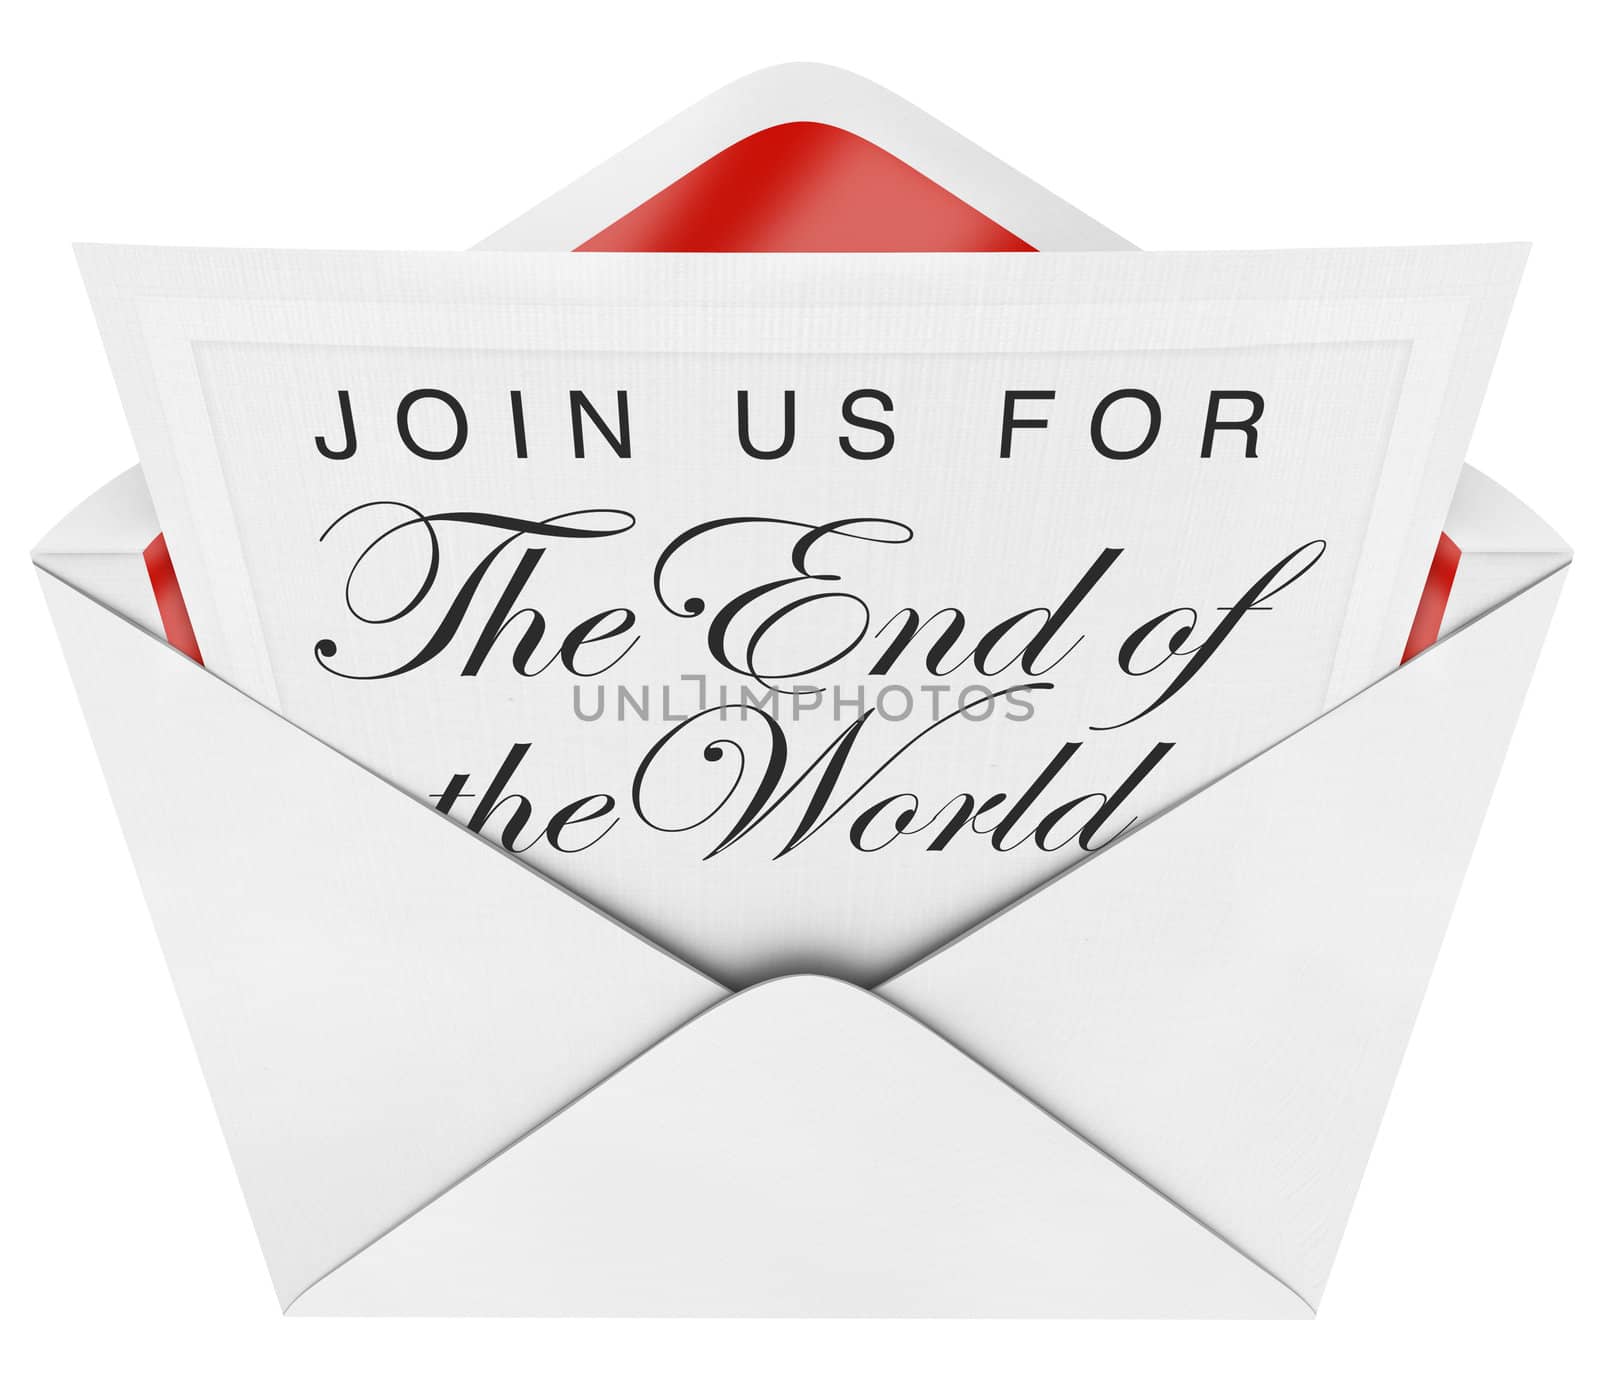 Join Us for the End of the World is written on a formal invitation you have opened in an envelope, warning you that the apocalypse, rapture or end of days is imminent